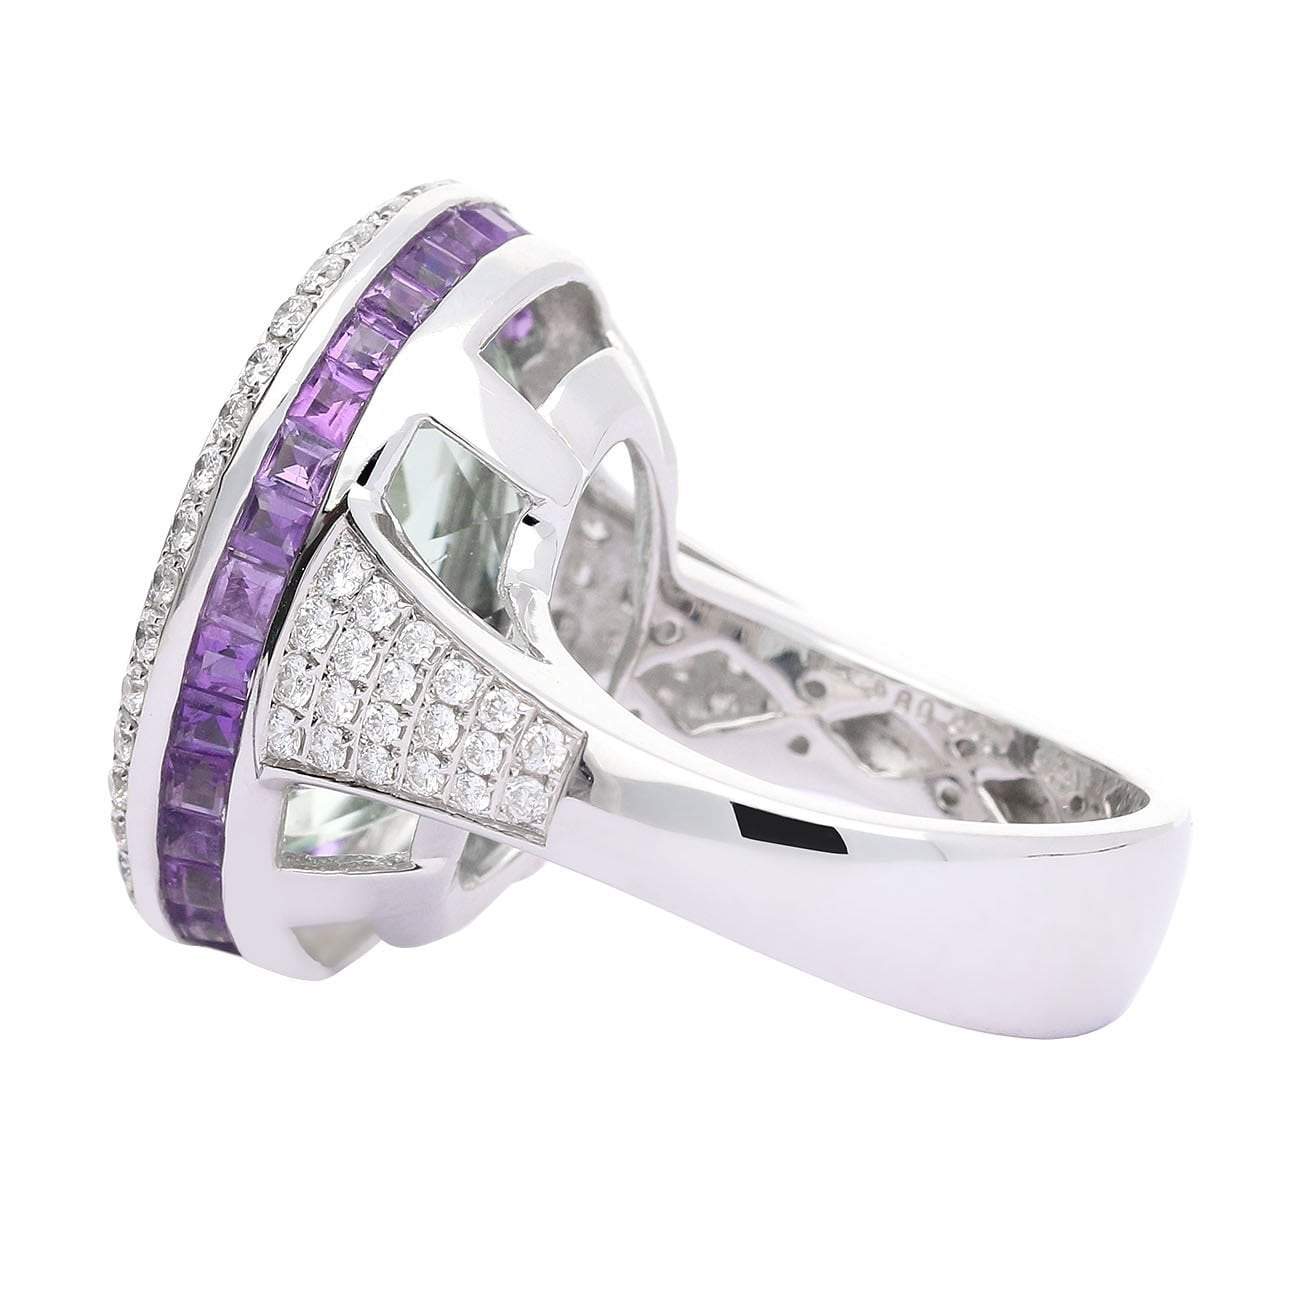 18ct White gold 14.32ct Green Beryl ring surrounded by amethyst and diamonds Ring Buchwald   